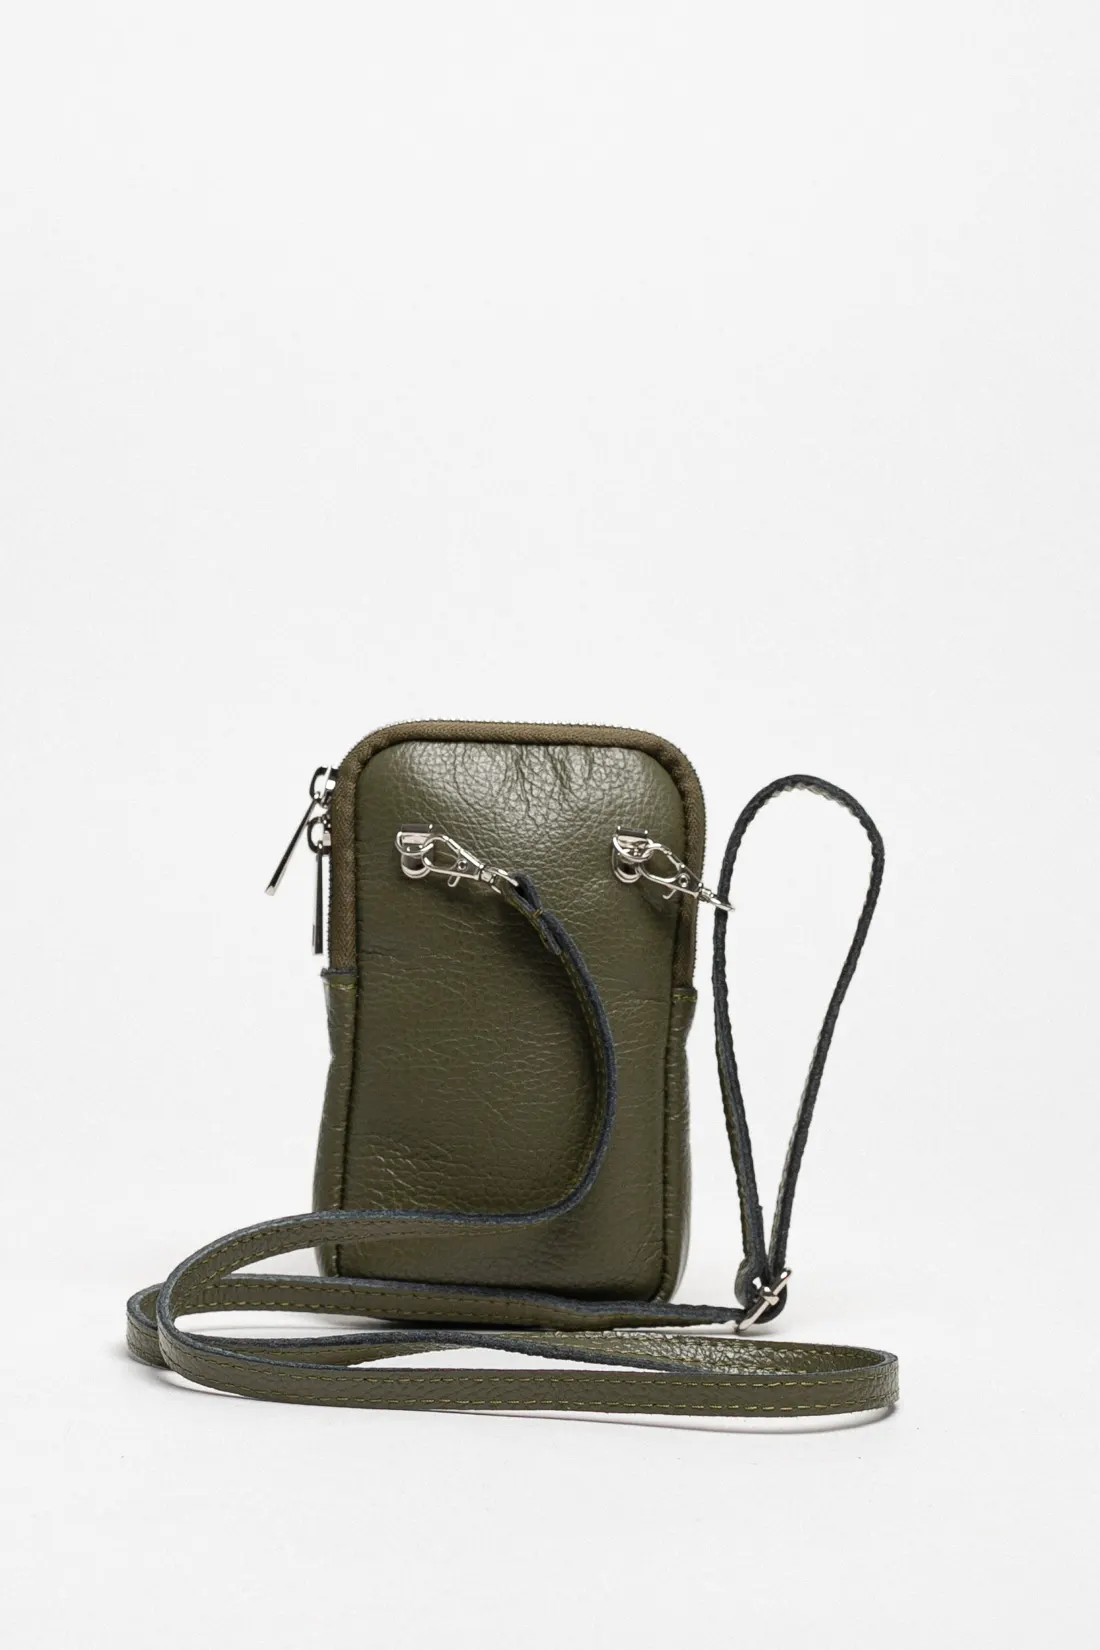 BURTON LEATHER MOBILE HOLDER - ARMY GREEN